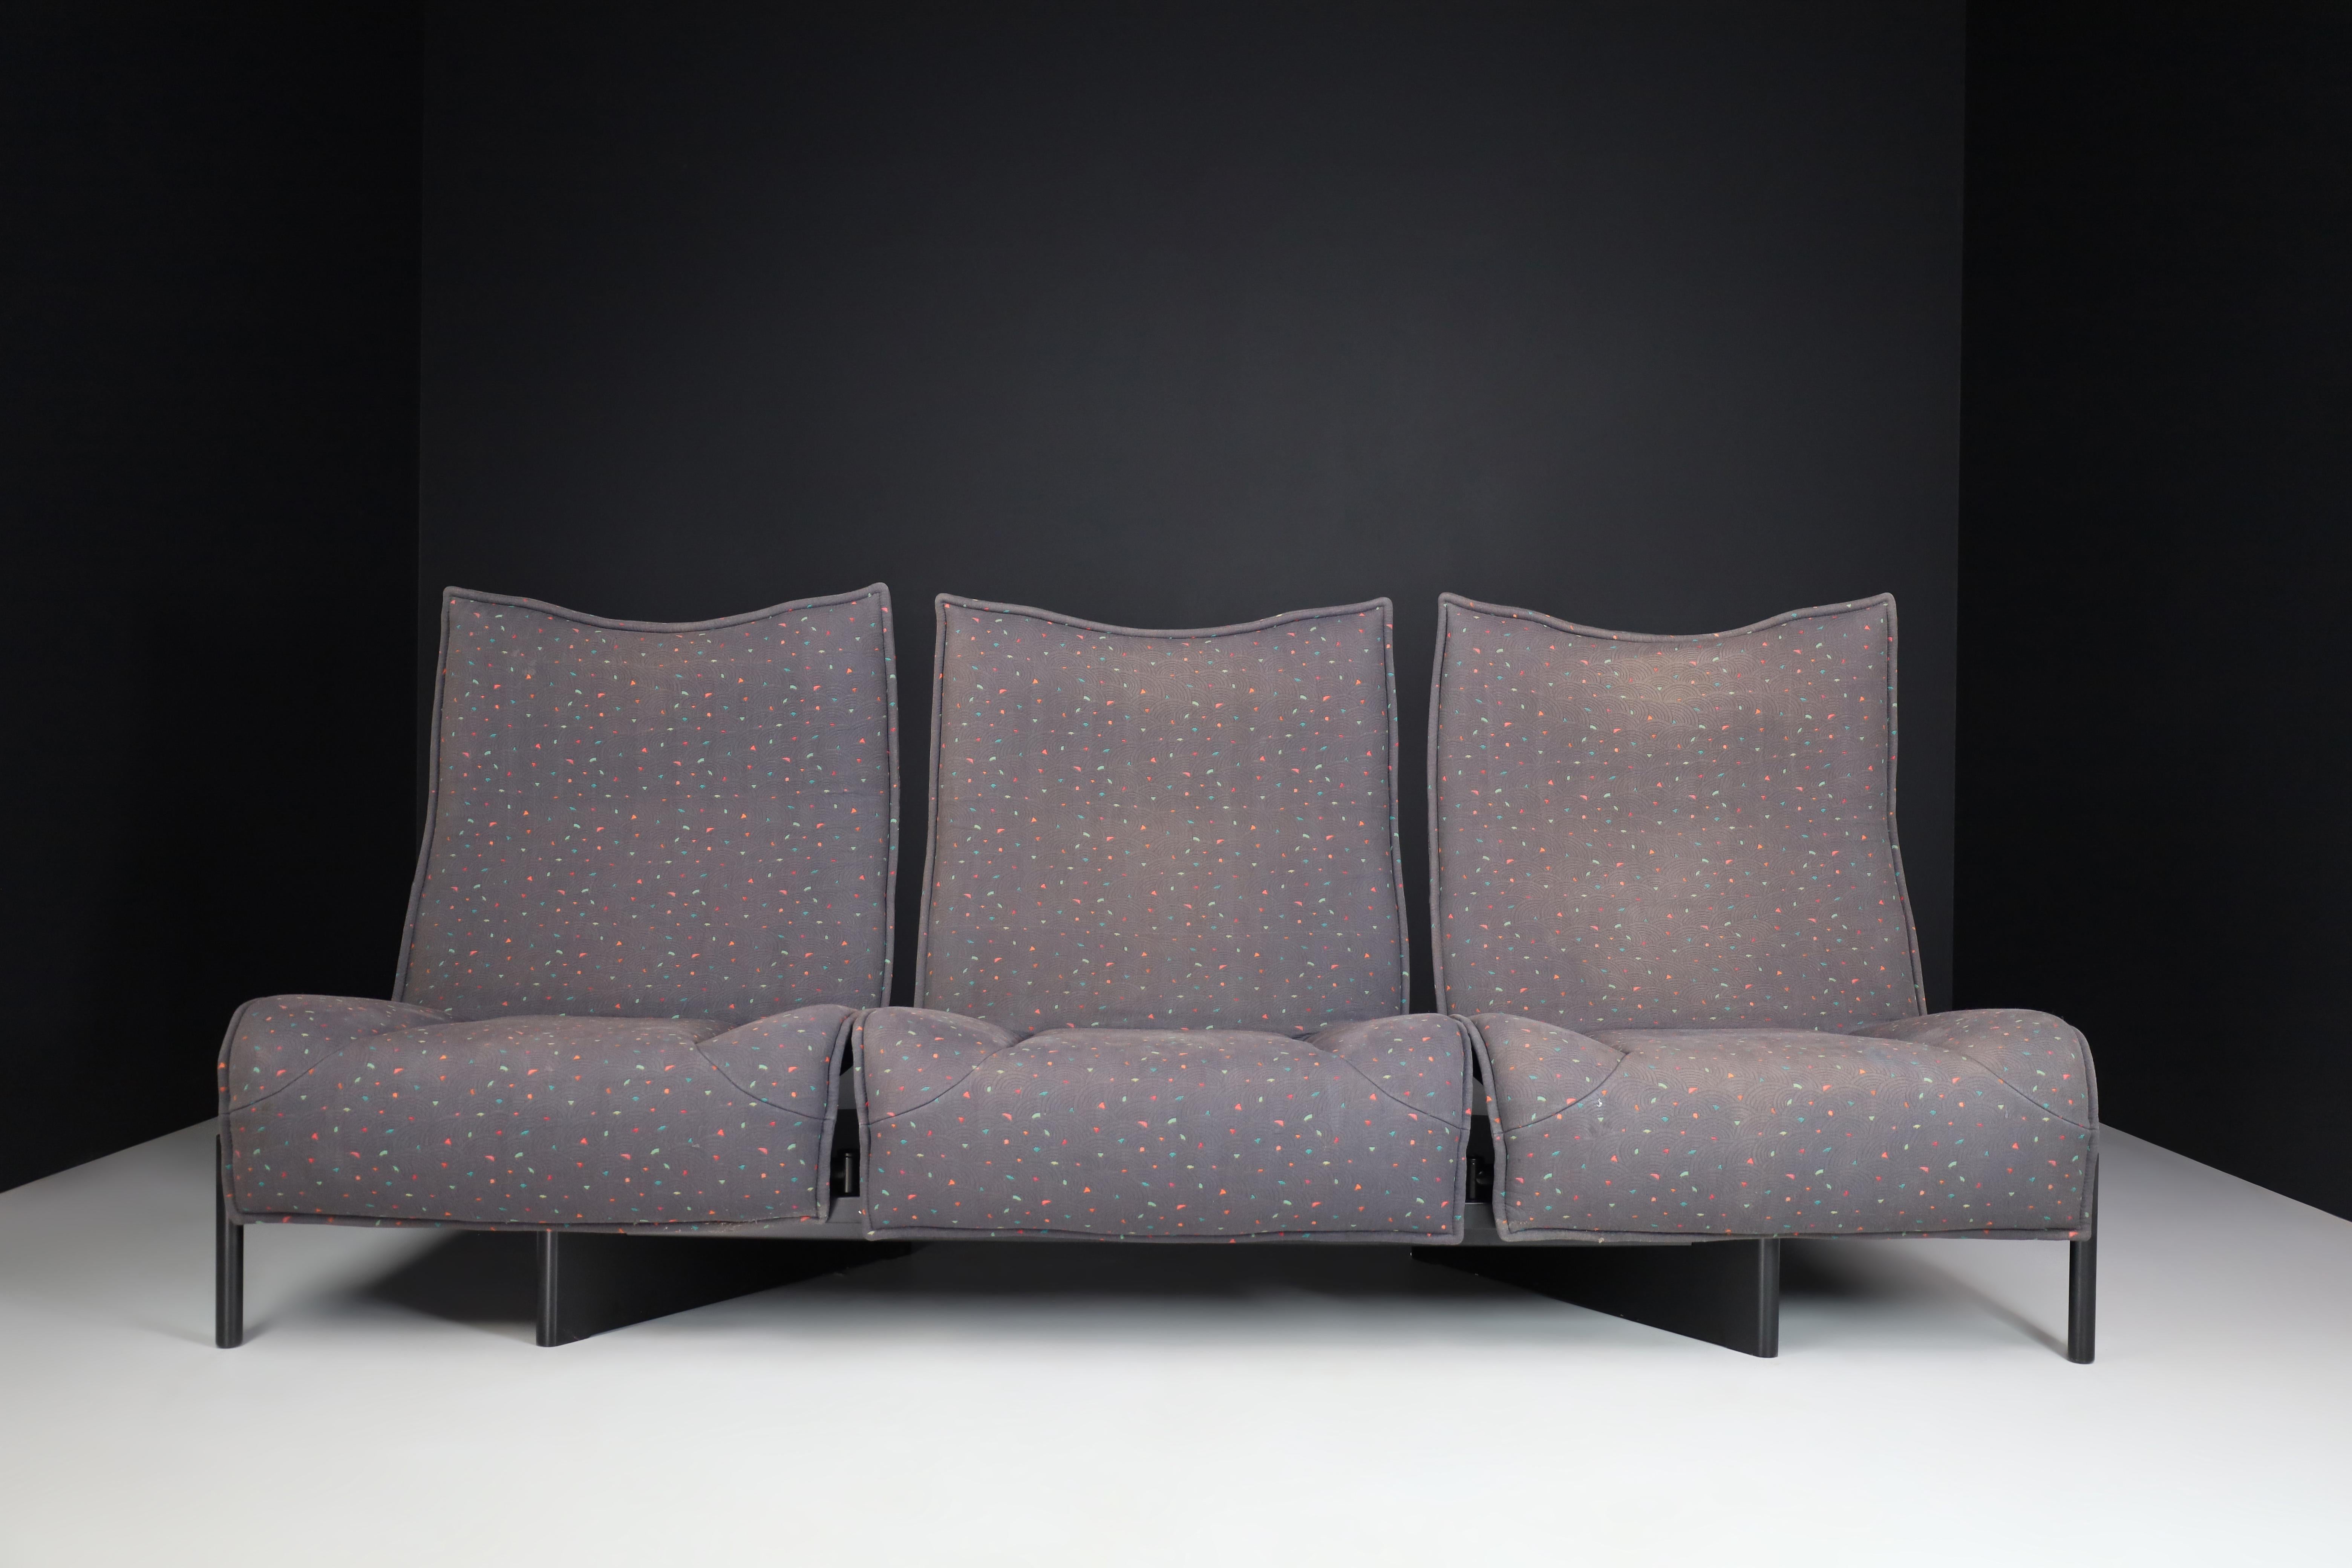 This multicolored and adjustable sofa was designed by Vico Magistretti for Cassina, circa 1980s. This smart and highly desirable Italian design features seats that are upholstered with fabric and that can be adjusted in place and the backrests in